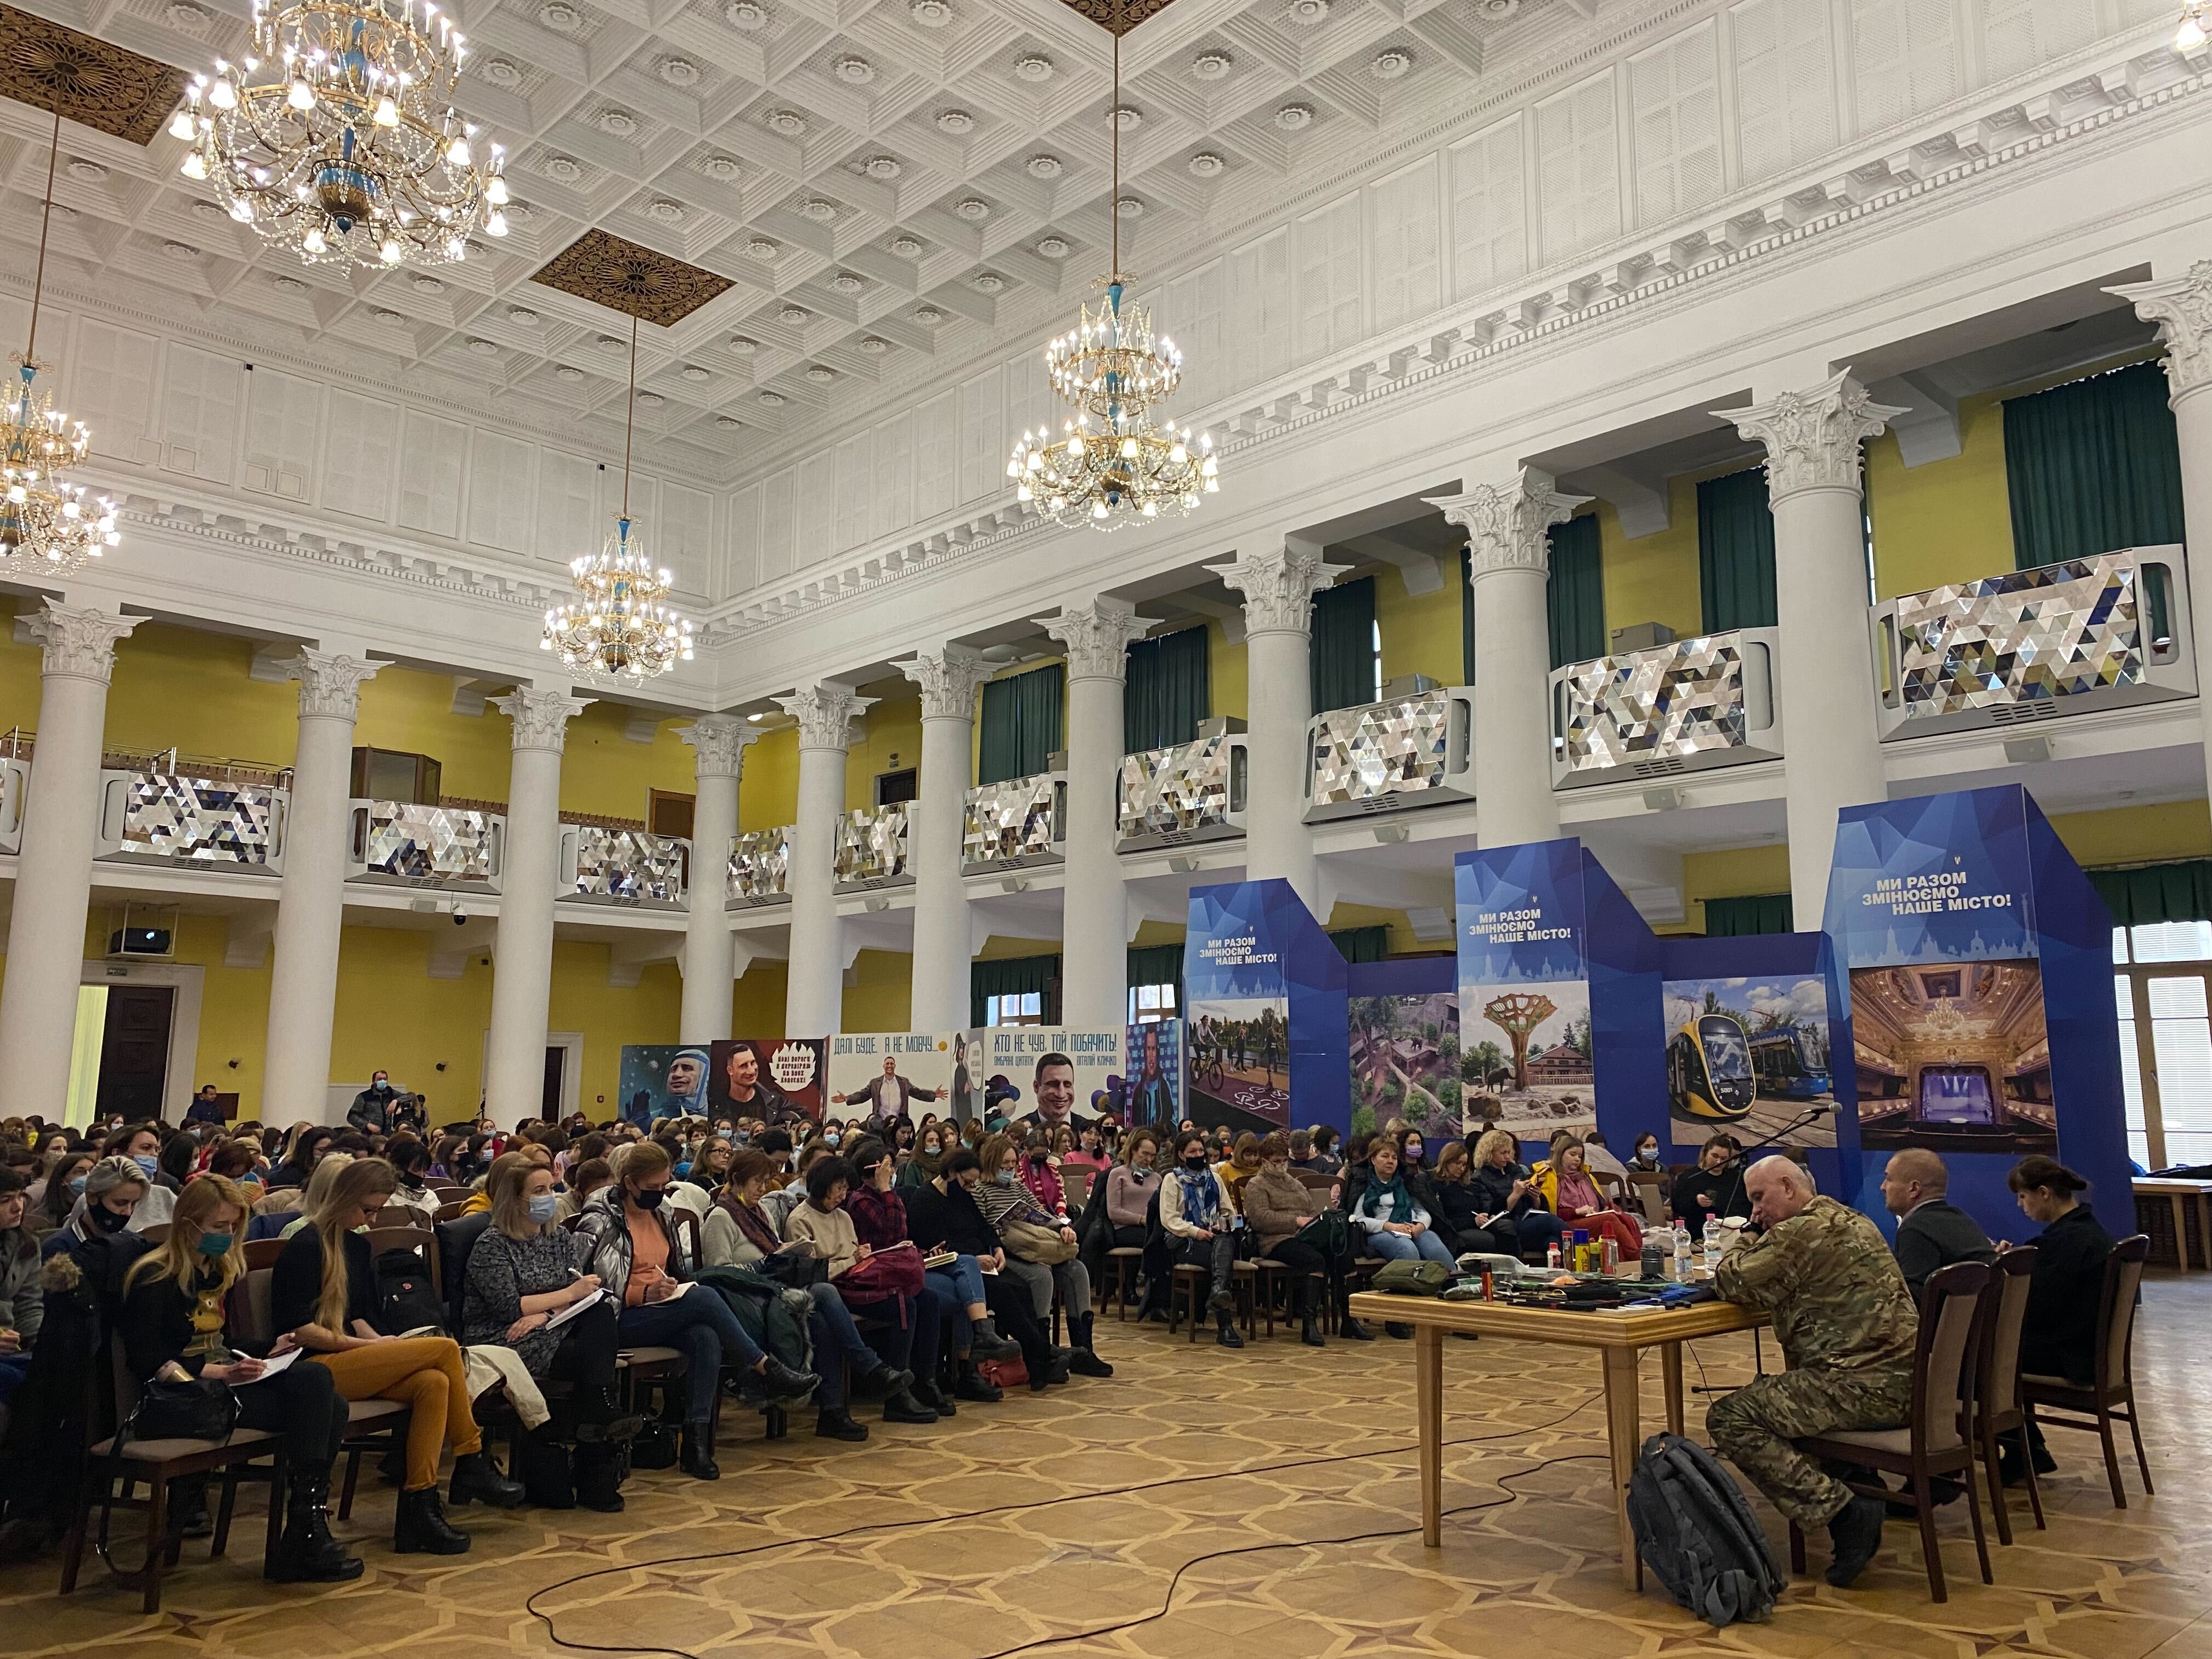 Around 240 women attended the survival training at Kyiv’s town hall on Saturday.